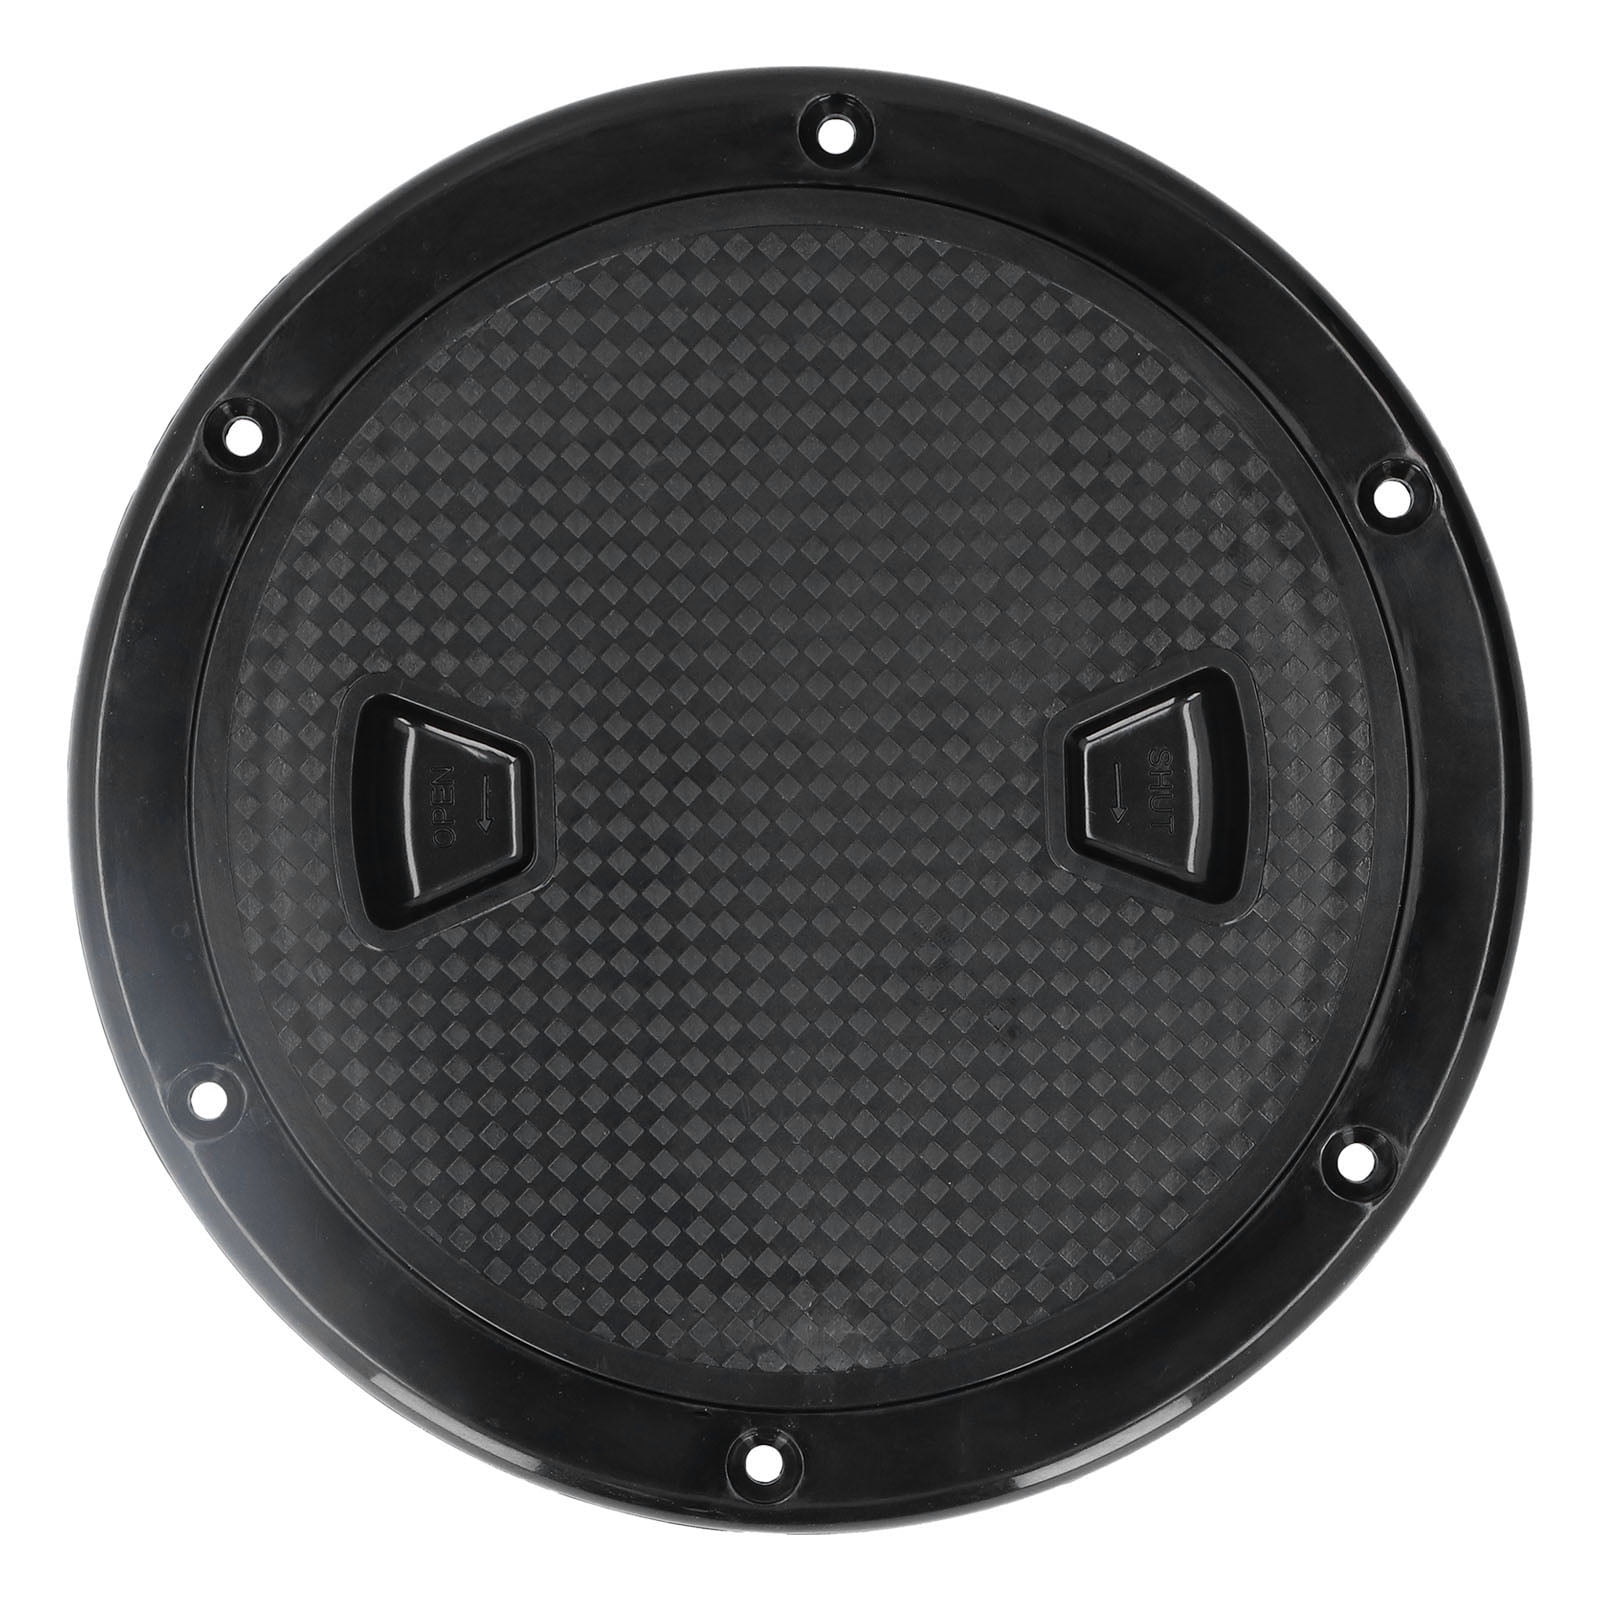 Deck Access , Round Waterproof Black Boat Deck Plate Anti-UV For Boat ...